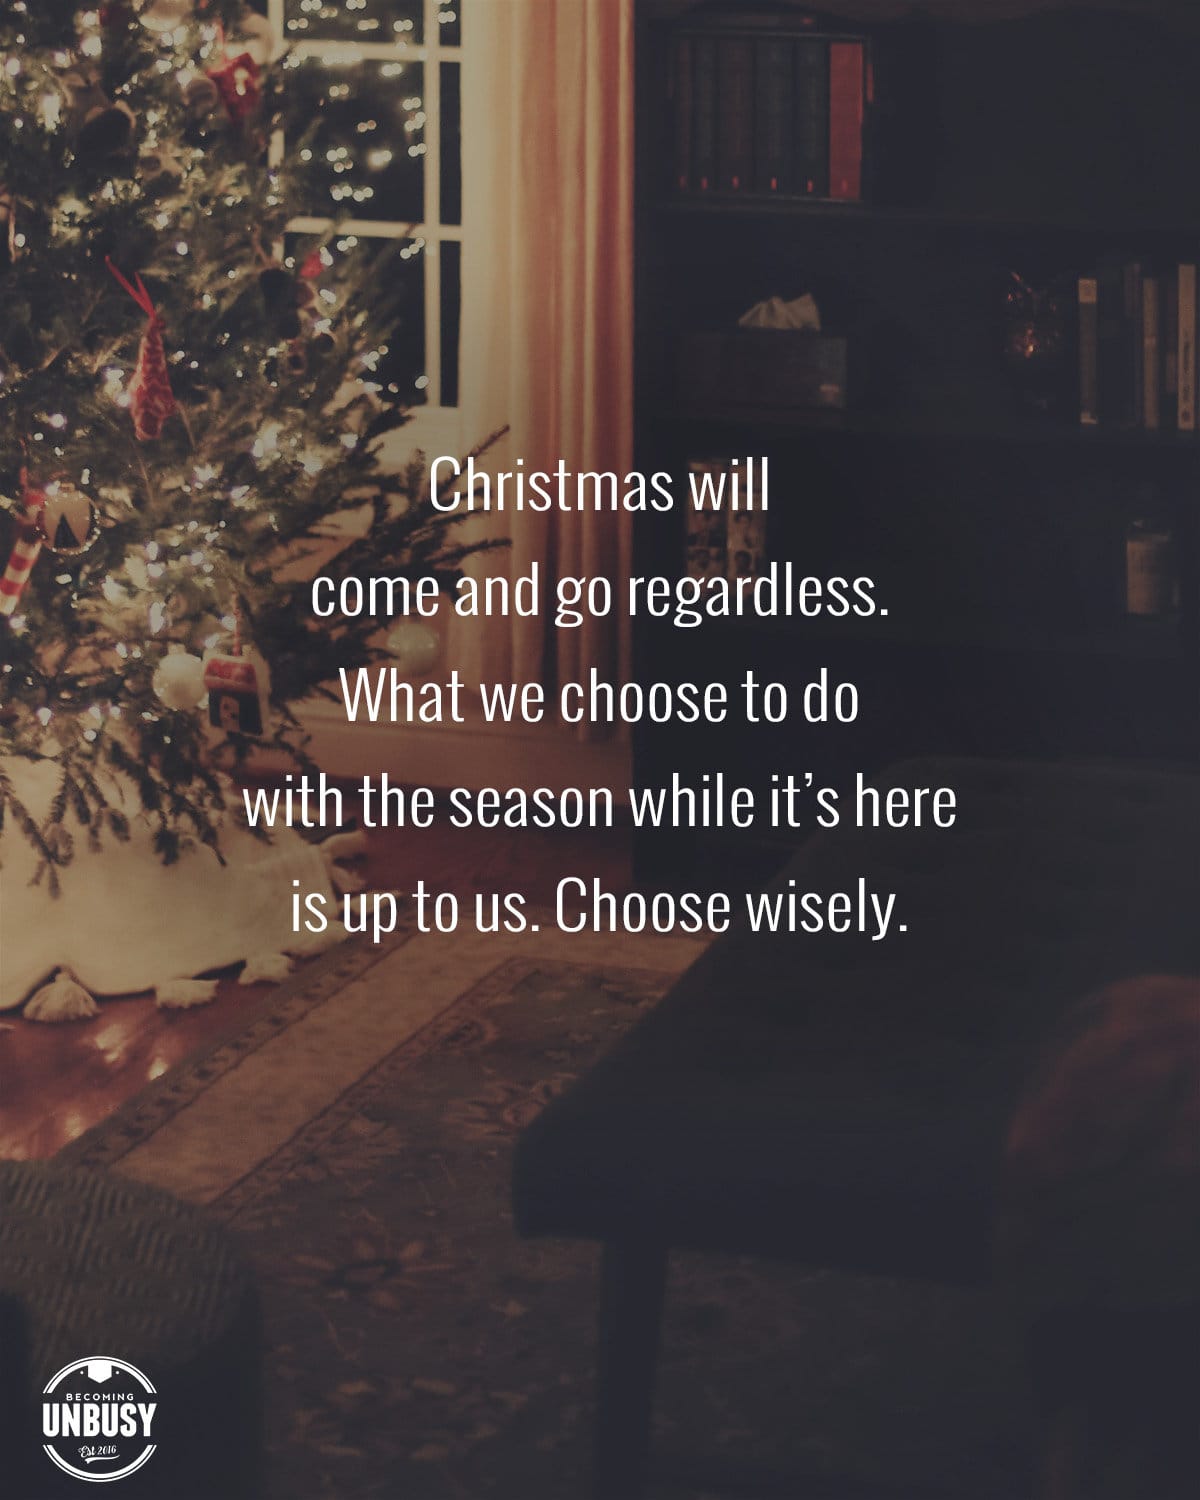 The following quote shared over an image of a gently lit Christmas tree, "Christmas will come and go regardless. What we choose to do with the season while it's here is up to us. Choose wisely."